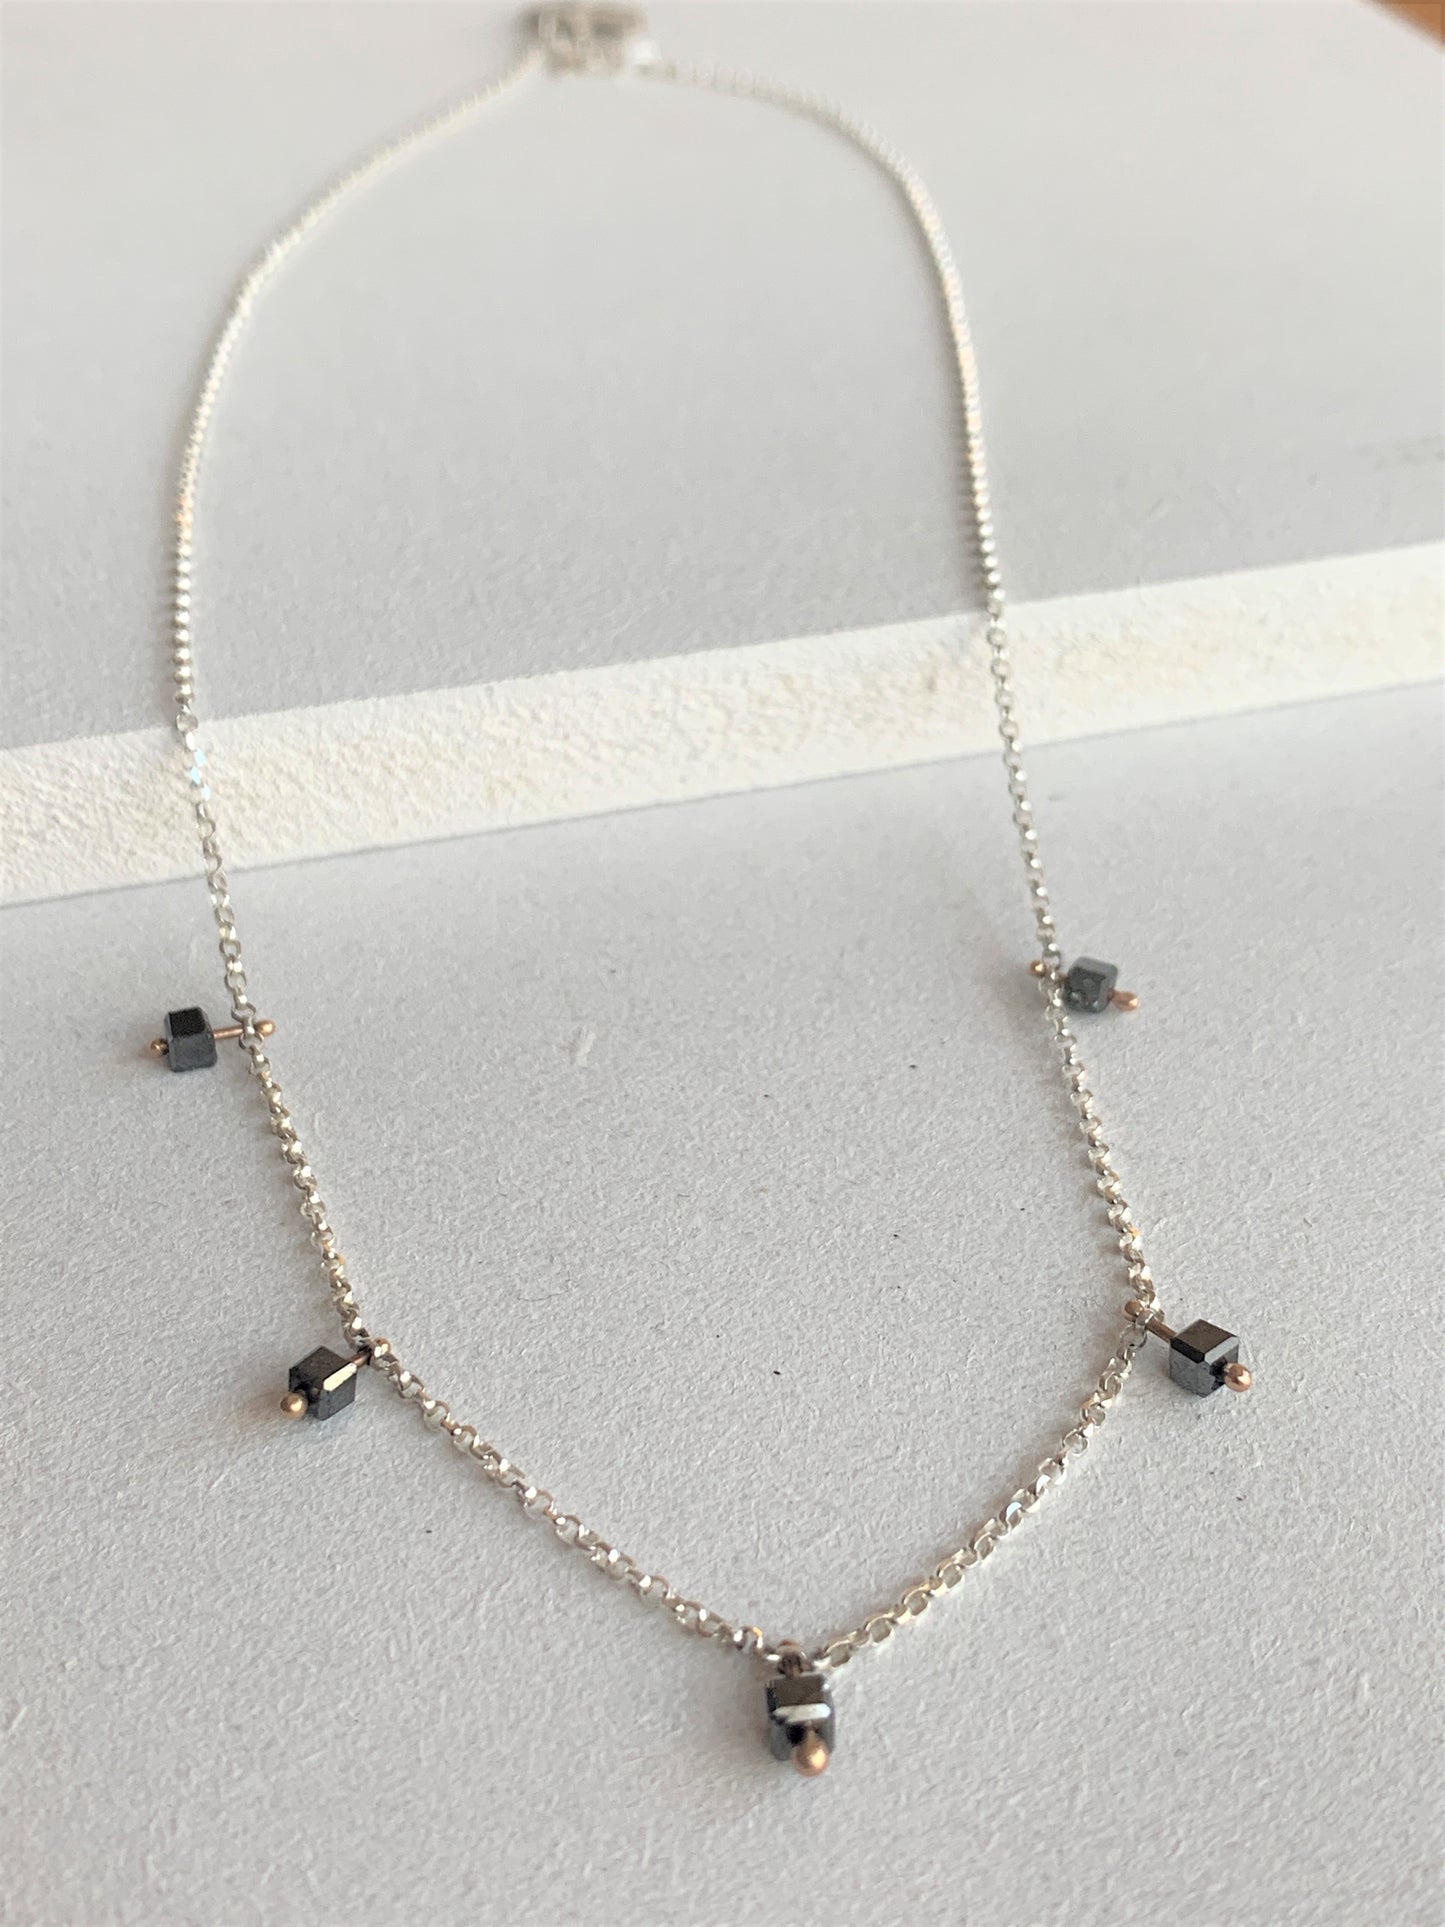 Dazzle 5 rough black diamond necklace with 9ct rose gold and silver